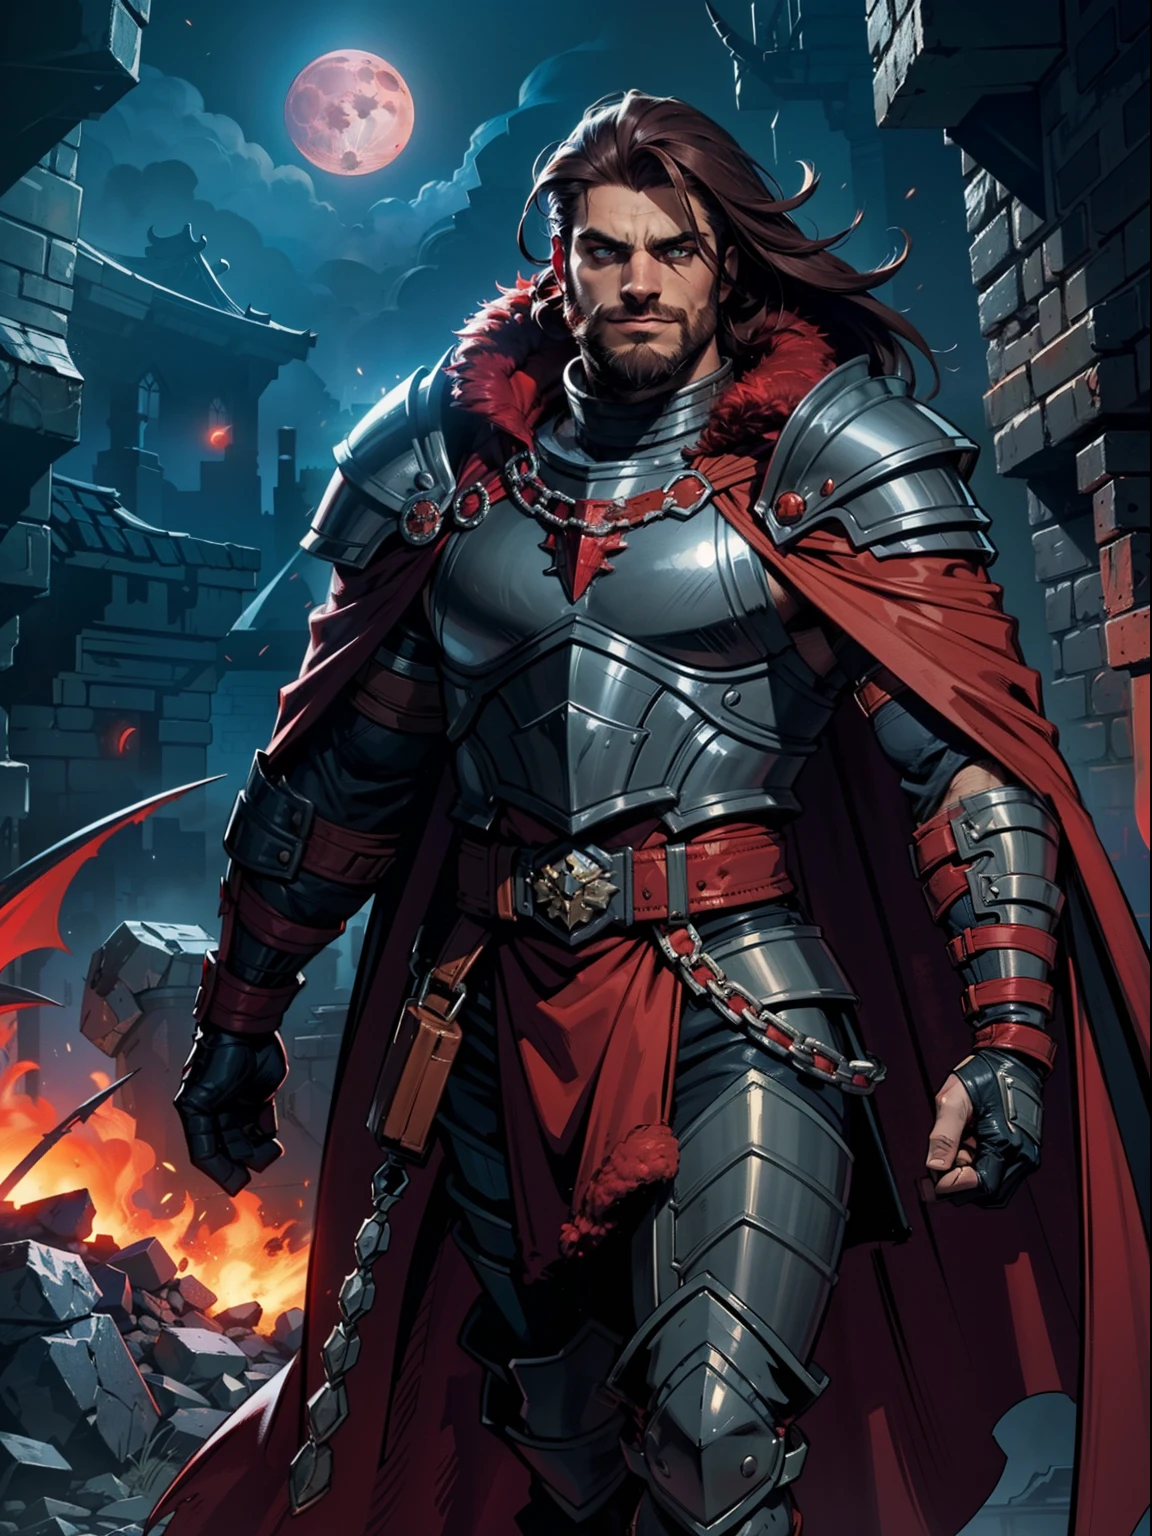 Dark night blood moon background, Darkest Dungeon style, walking. Sadurang from Marvel, hunk, buffed physics, short mane hair, mullet, defined face, detailed eyes, short beard, glowing red eyes, dark hair, wily smile, badass, dangerous. Wearing full armor with red dragon scales, cape of furs.